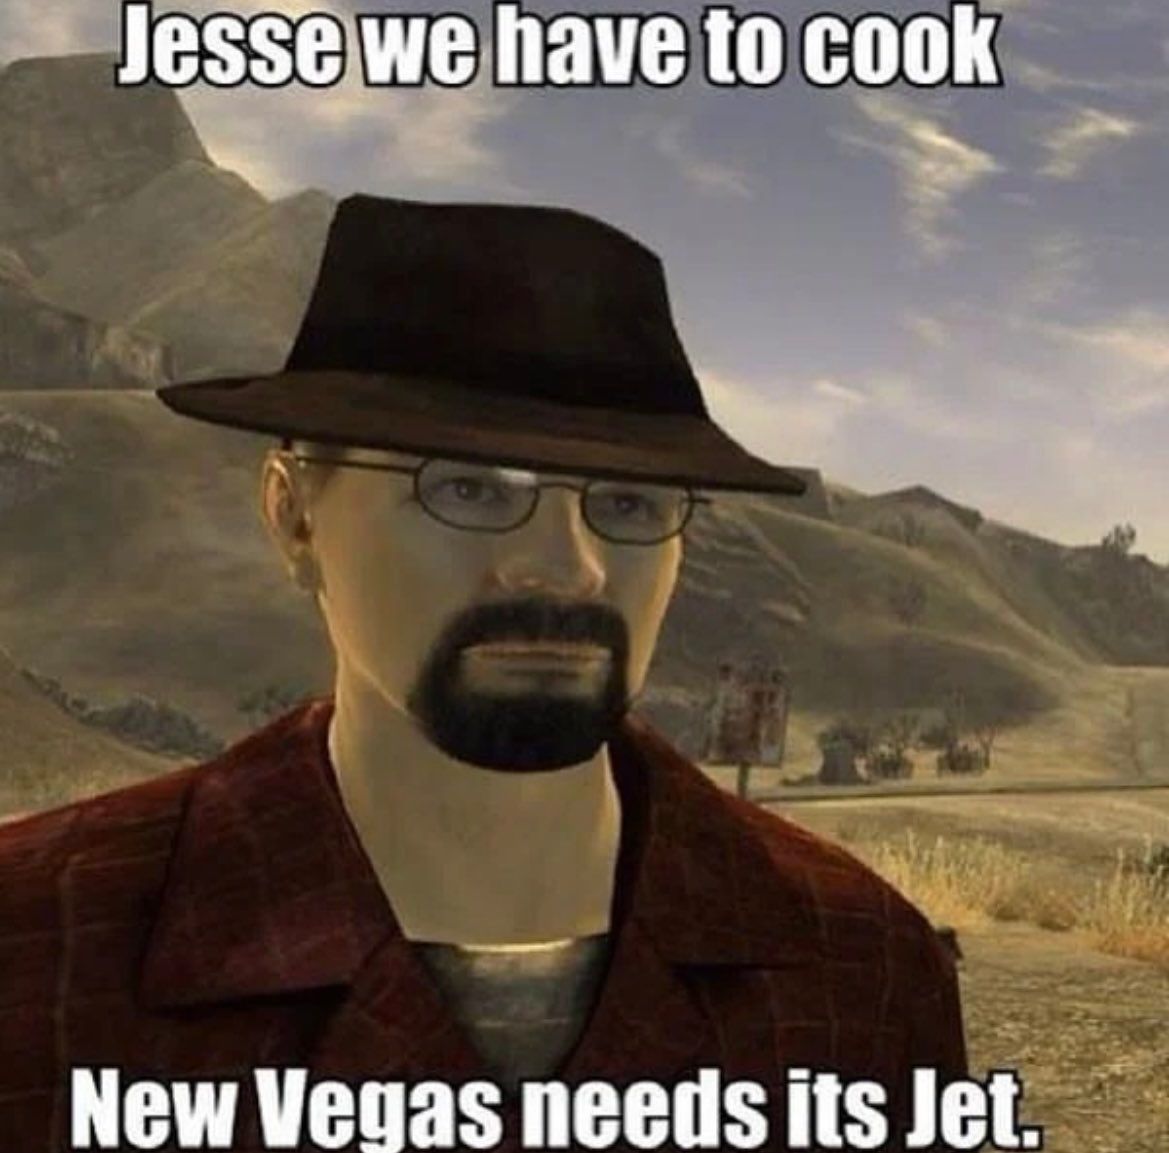 Jesse we have to cook
New Vegas needs its Jet.